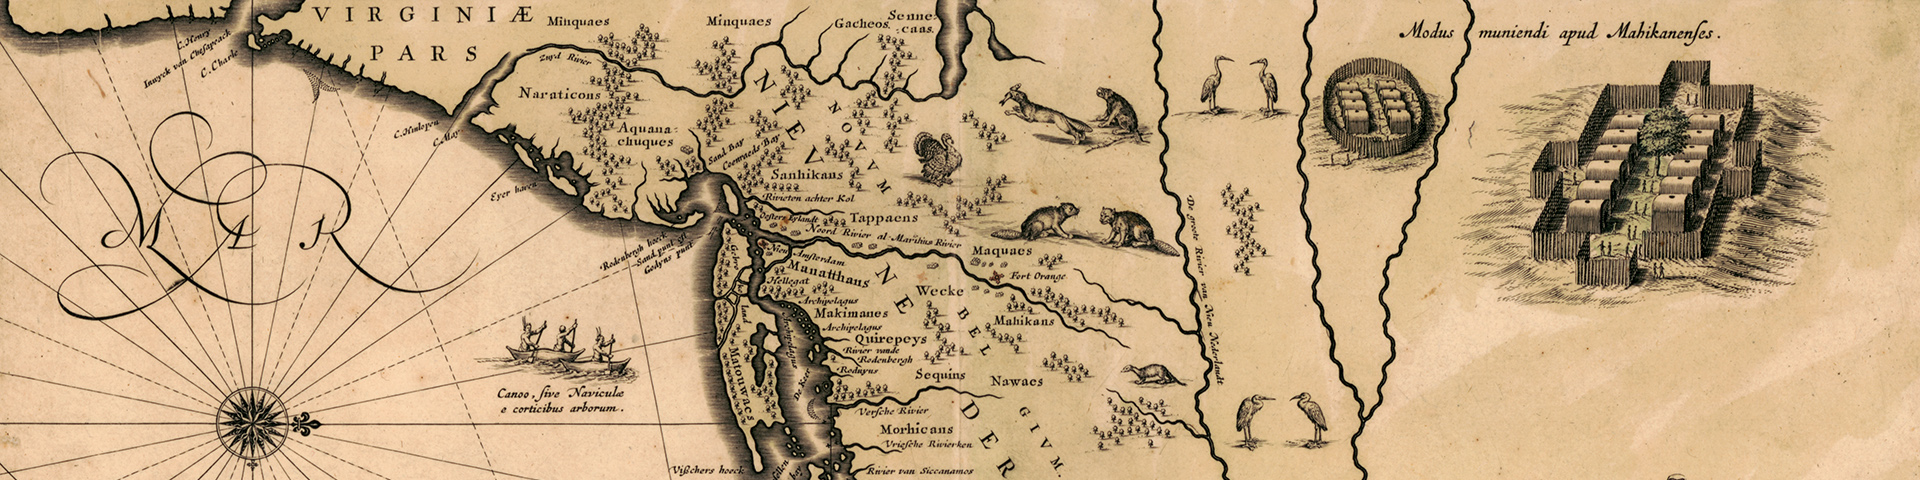 deail of 1630 map of North America with illustrations of Native Americans as well as beavers, cranes, and turkeys.